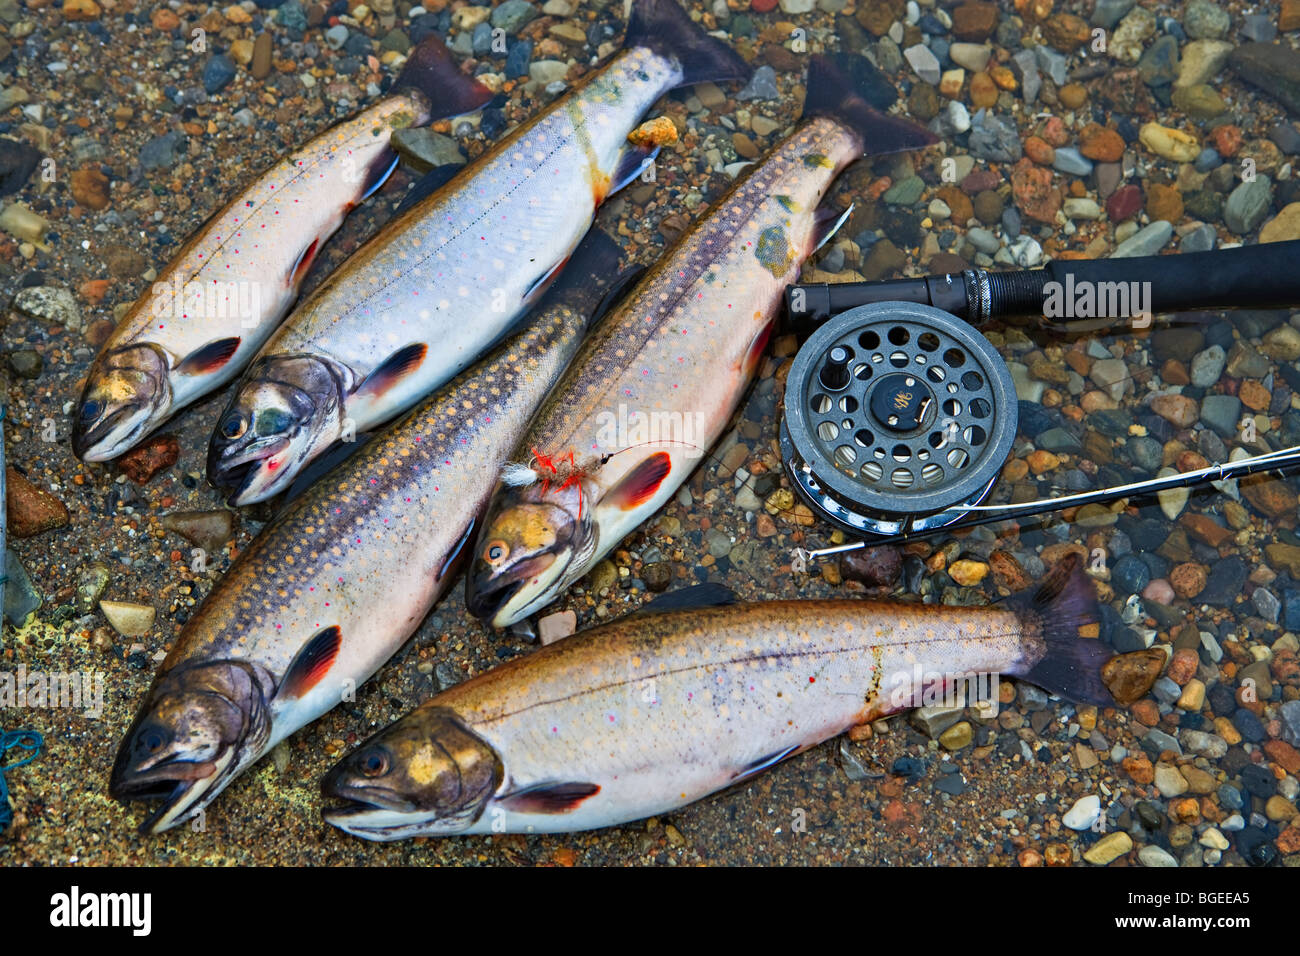 Fishing Rod and Speckled Trout, caught from near Tuckamore Lodge, Main Brook, Highway 432, Viking Trail, Trails to the Vikings, Stock Photo